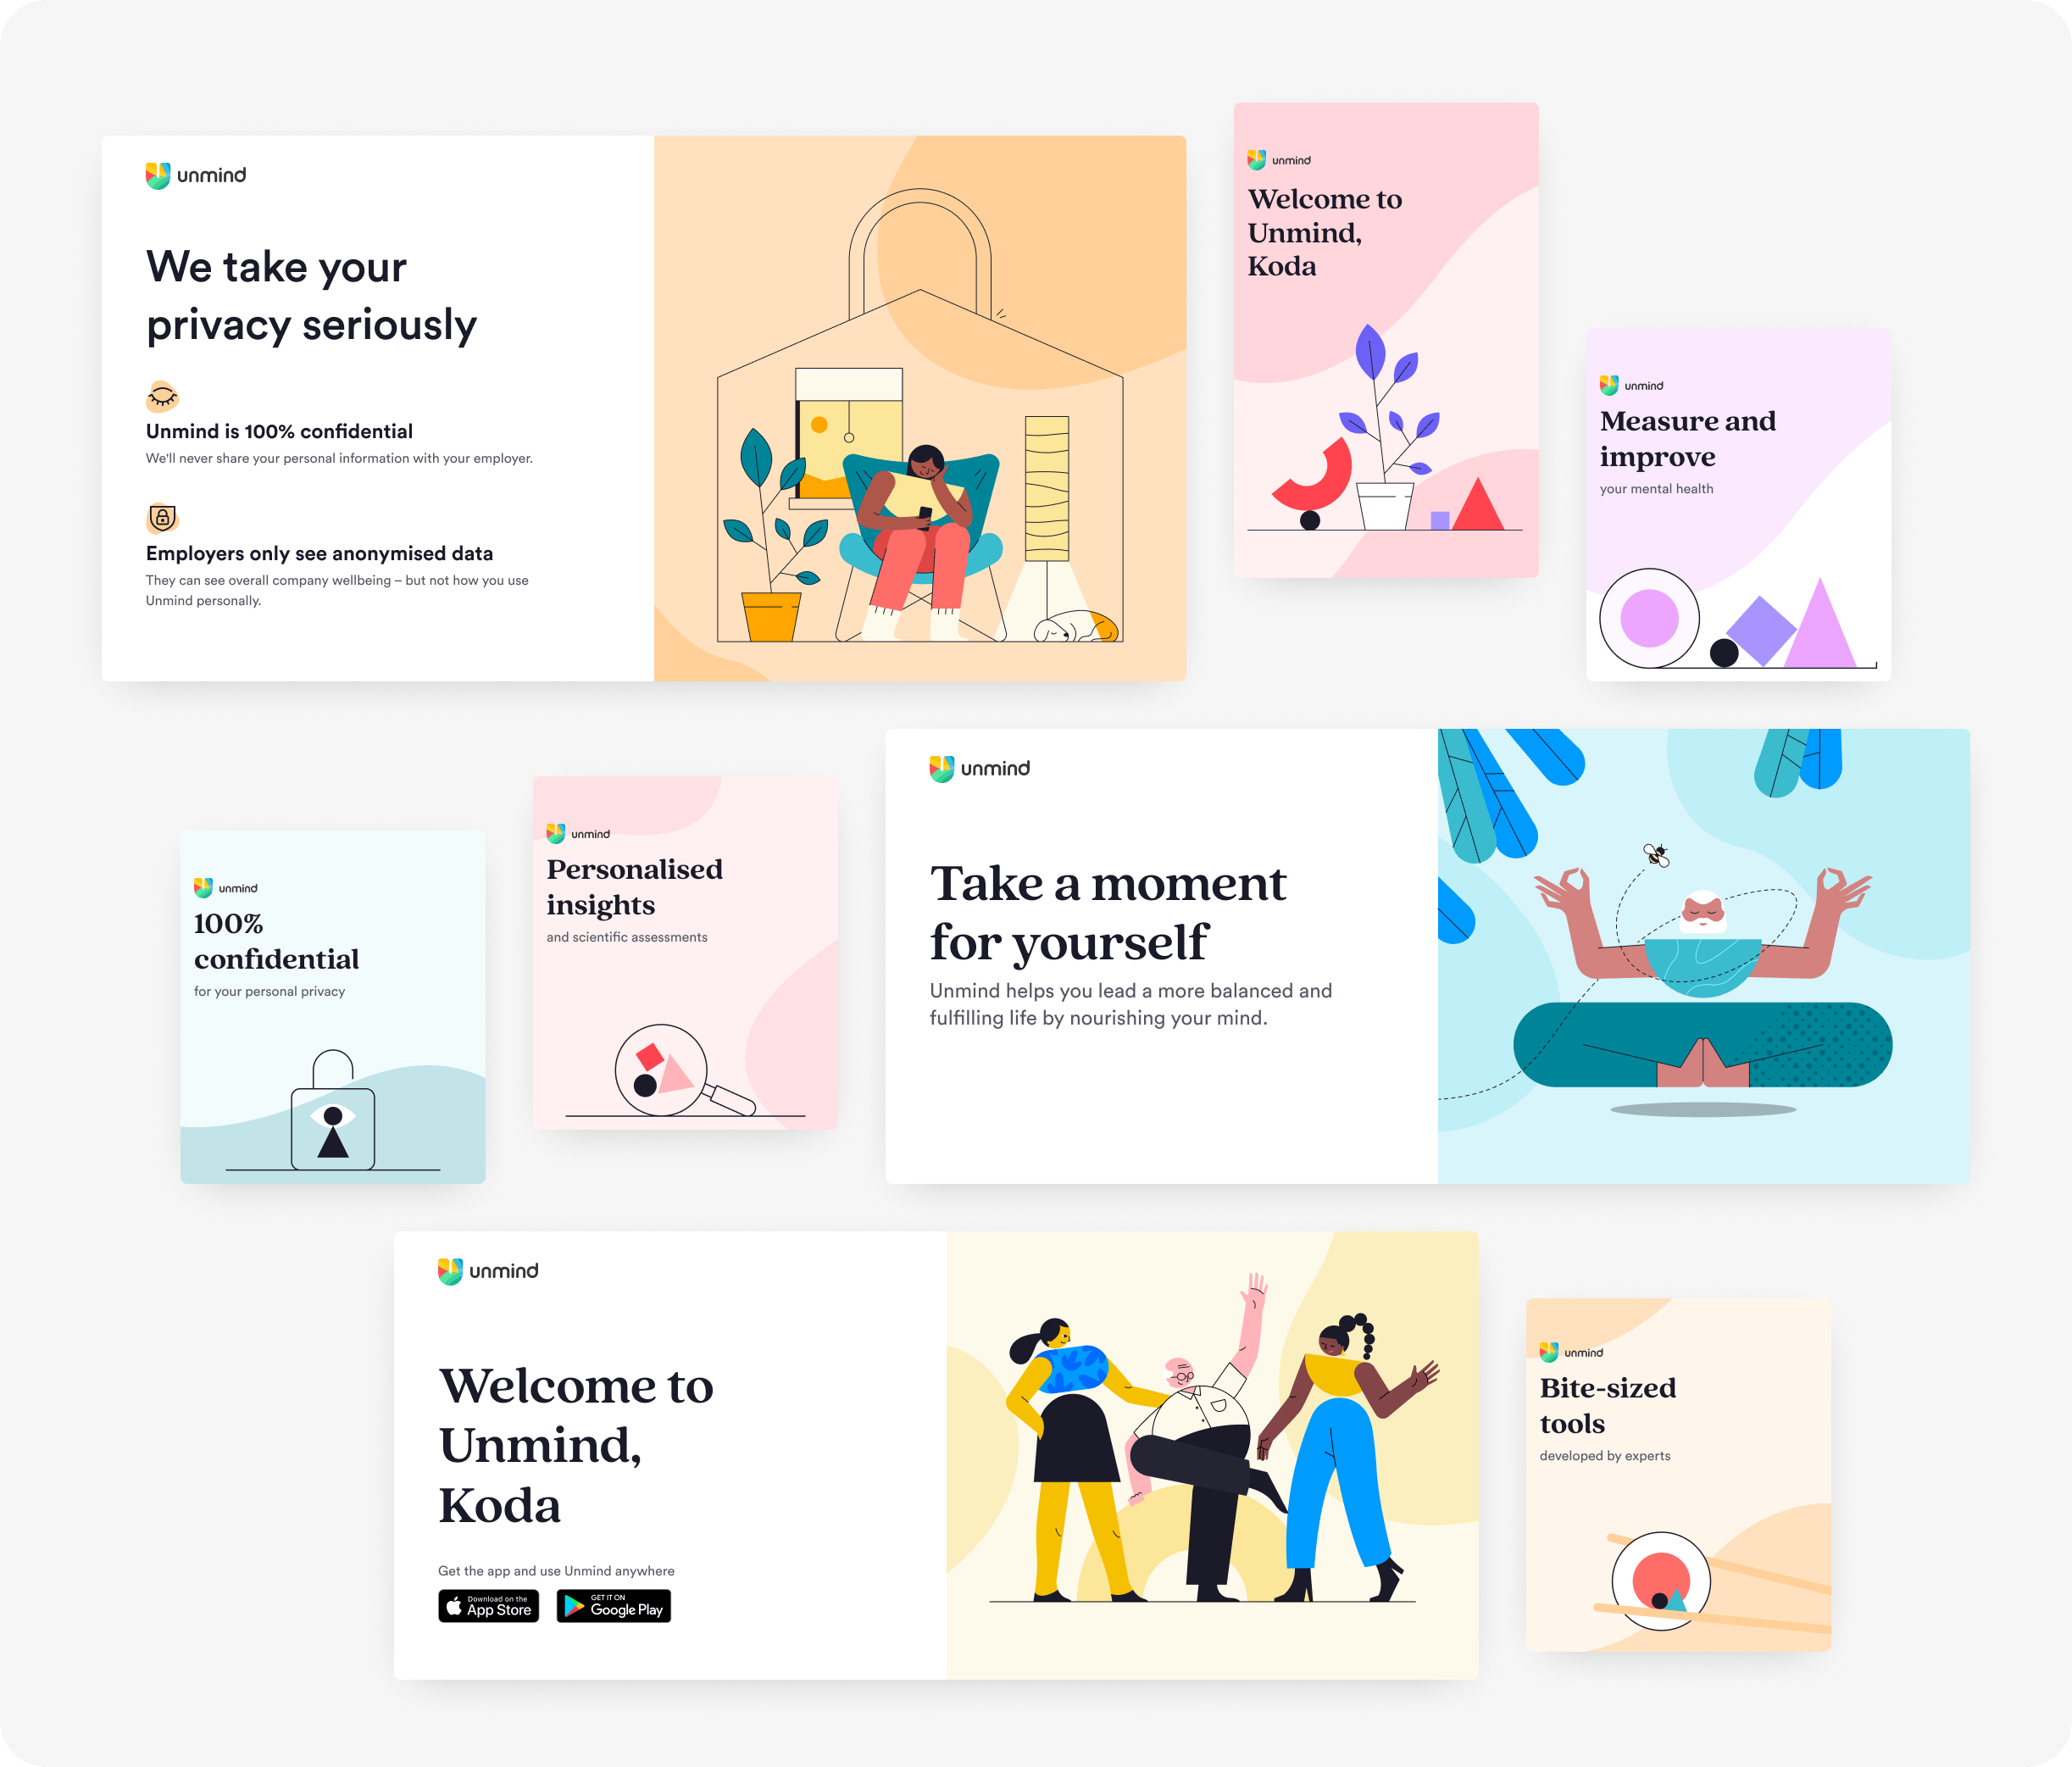 A montage of new screens that show the use of a soft and warm pastel coloured palette, large playful illustrations, and lots of white space to evoke feelings of warmth and trust.